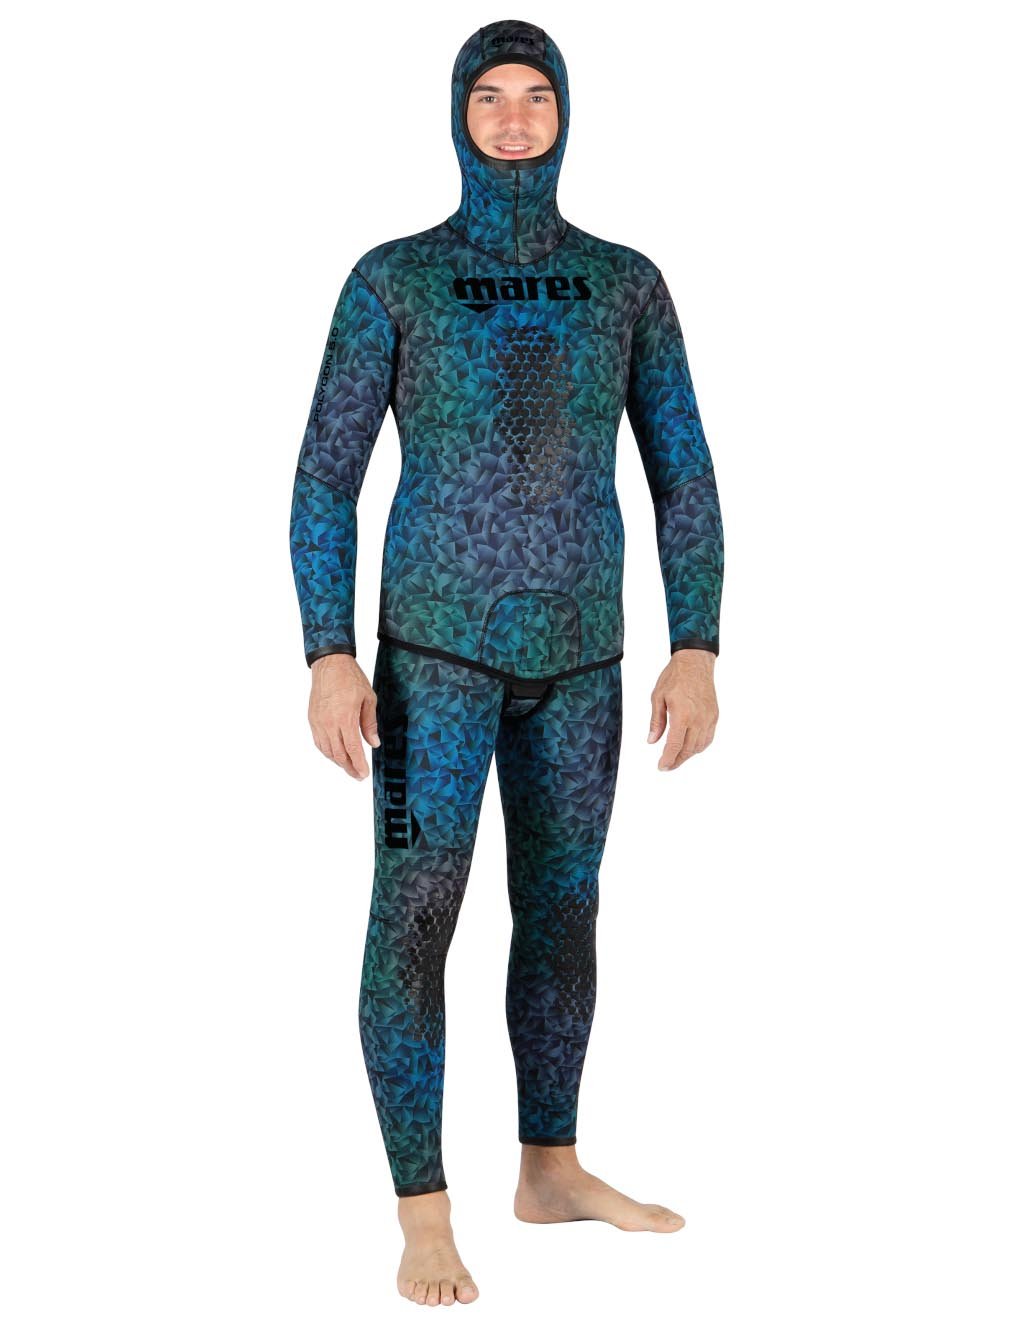 Oblek na freediving POLYGON 80 - 65 (Open Cell 8 a 6,5 mm)